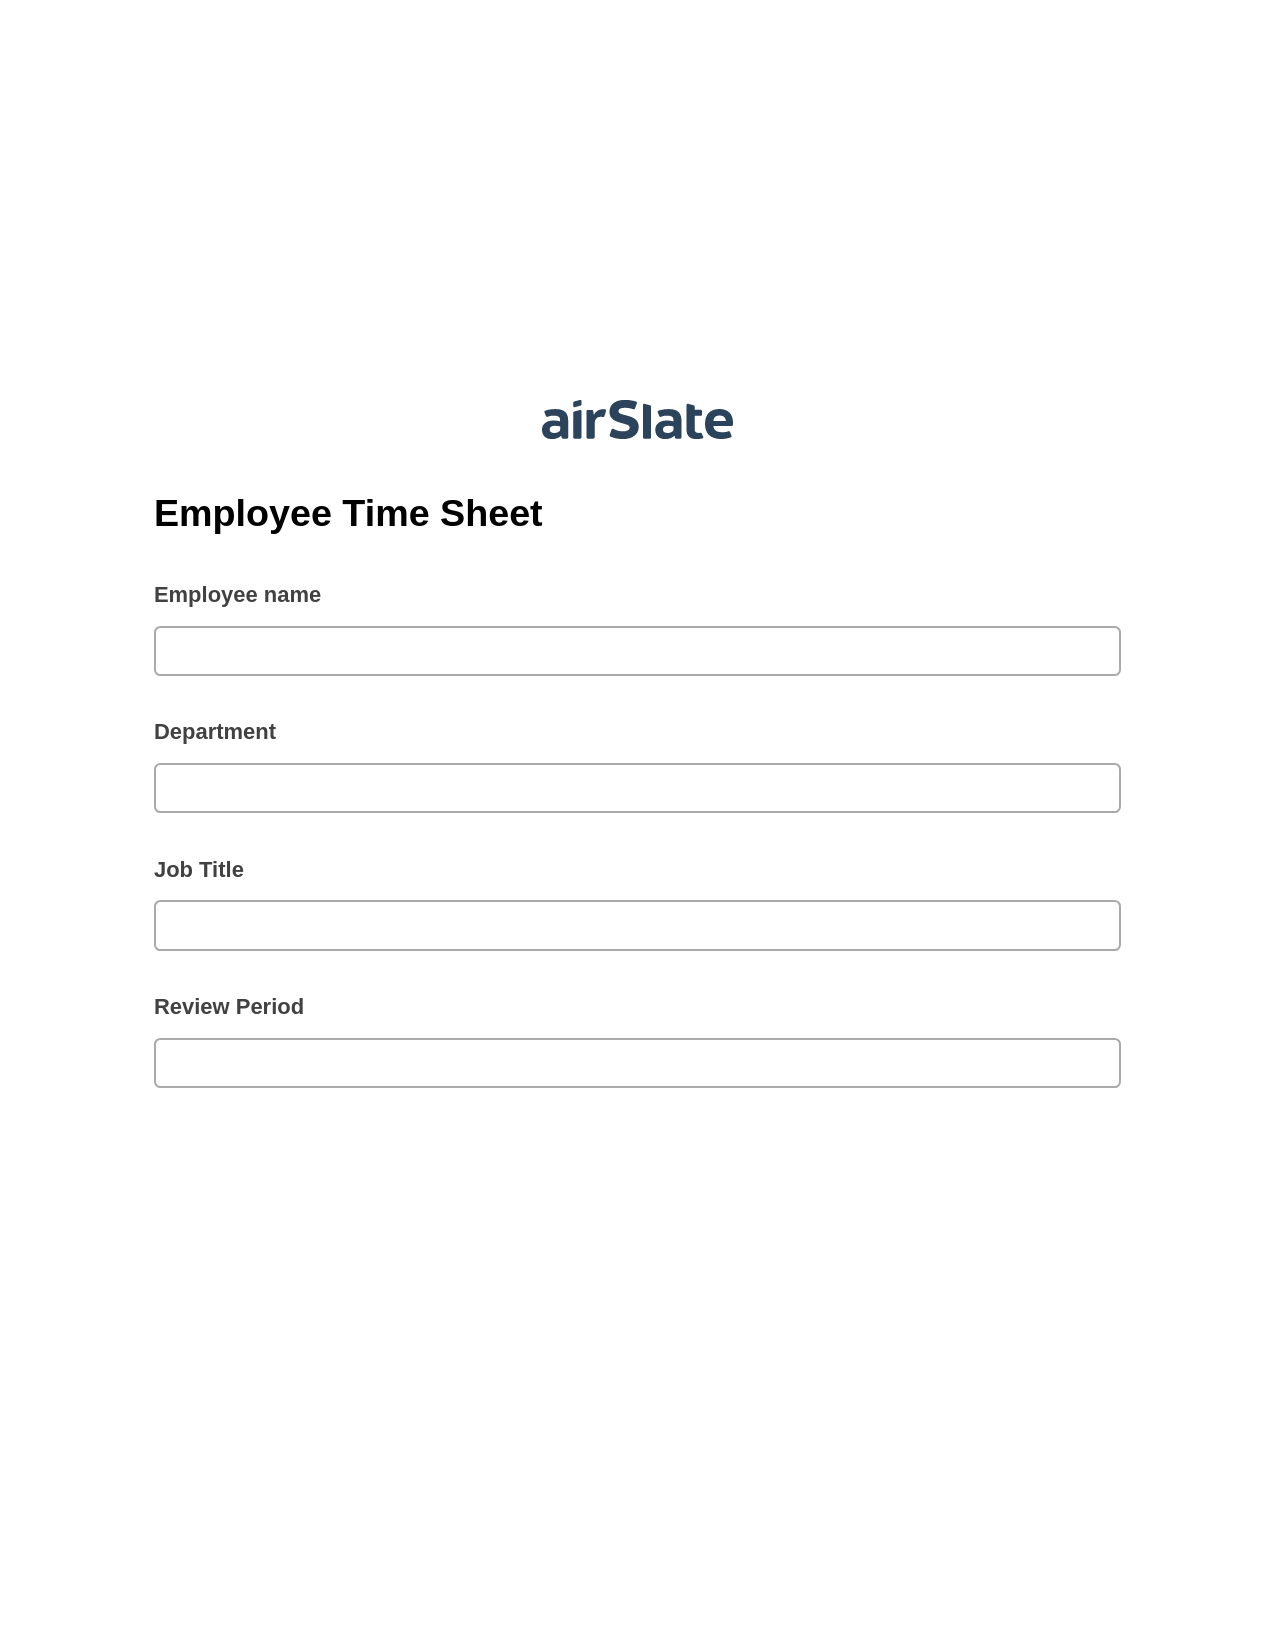 Employee Time Sheet Pre-fill from Google Sheets Bot, Update Audit Trail Bot, Archive to SharePoint Folder Bot